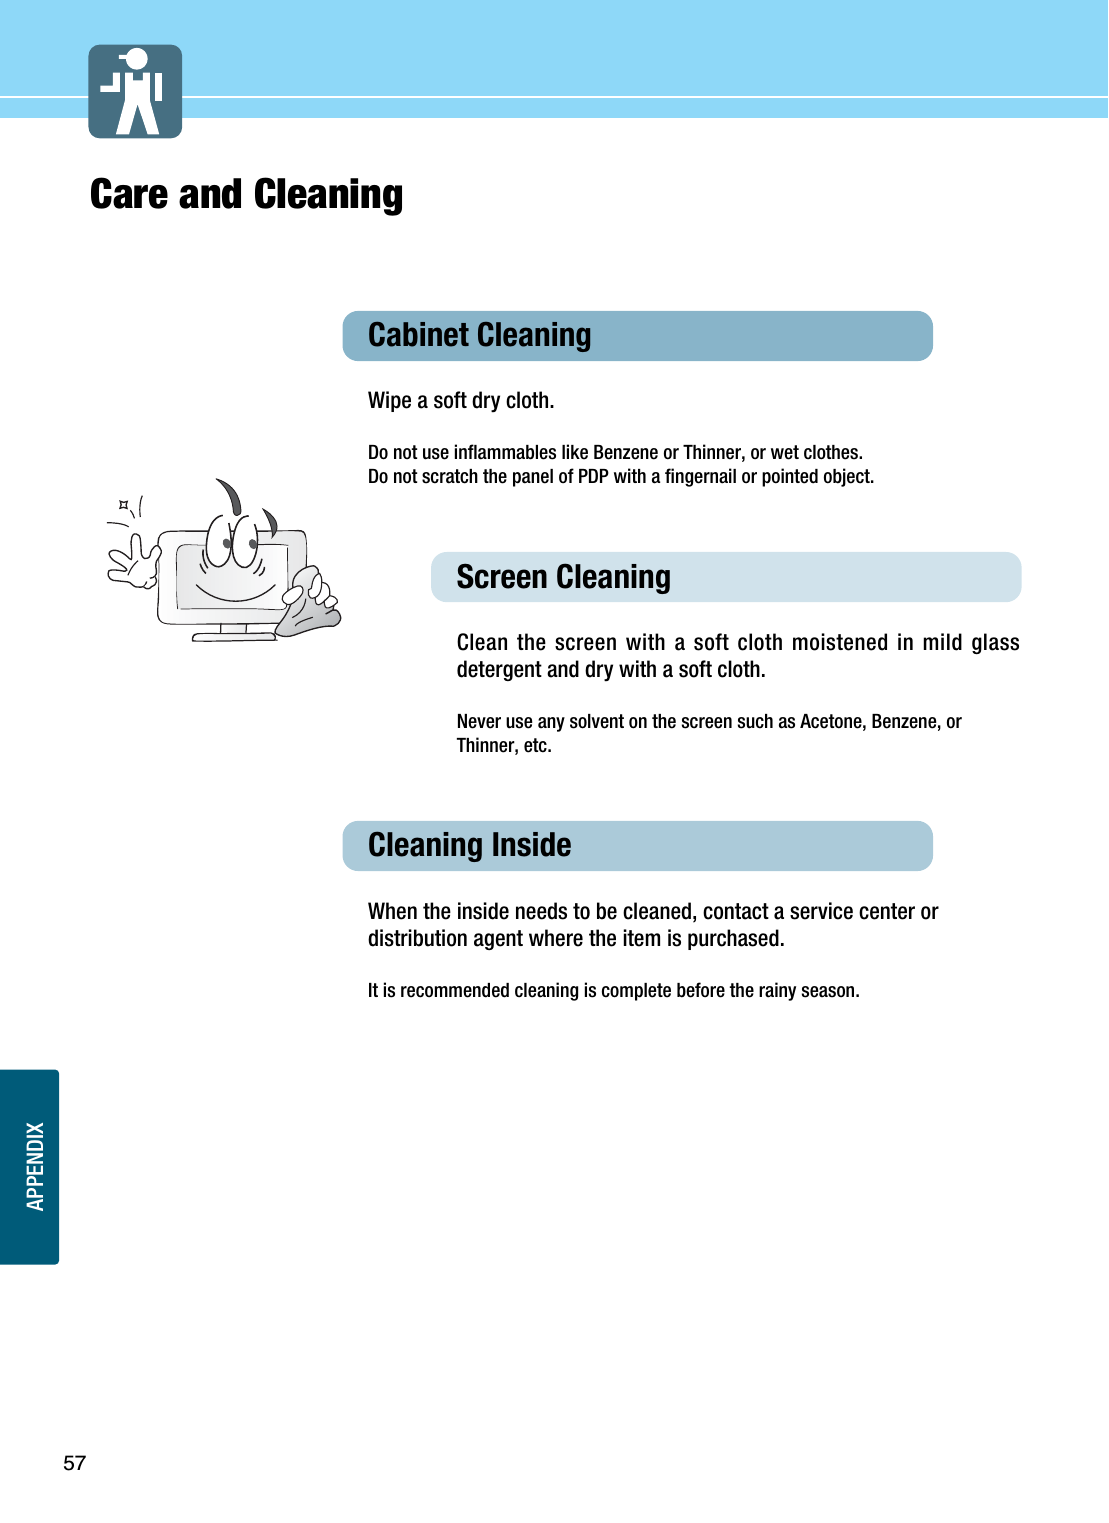 APPENDIX57Care and CleaningCabinet Cleaning Wipe a soft dry cloth. Do not use inflammables like Benzene or Thinner, or wet clothes. Do not scratch the panel of PDP with a fingernail or pointed object. Screen Cleaning Clean the screen with a soft cloth moistened in mild glassdetergent and dry with a soft cloth.Never use any solvent on the screen such as Acetone, Benzene, orThinner, etc.Cleaning Inside  When the inside needs to be cleaned, contact a service center ordistribution agent where the item is purchased.  It is recommended cleaning is complete before the rainy season. 